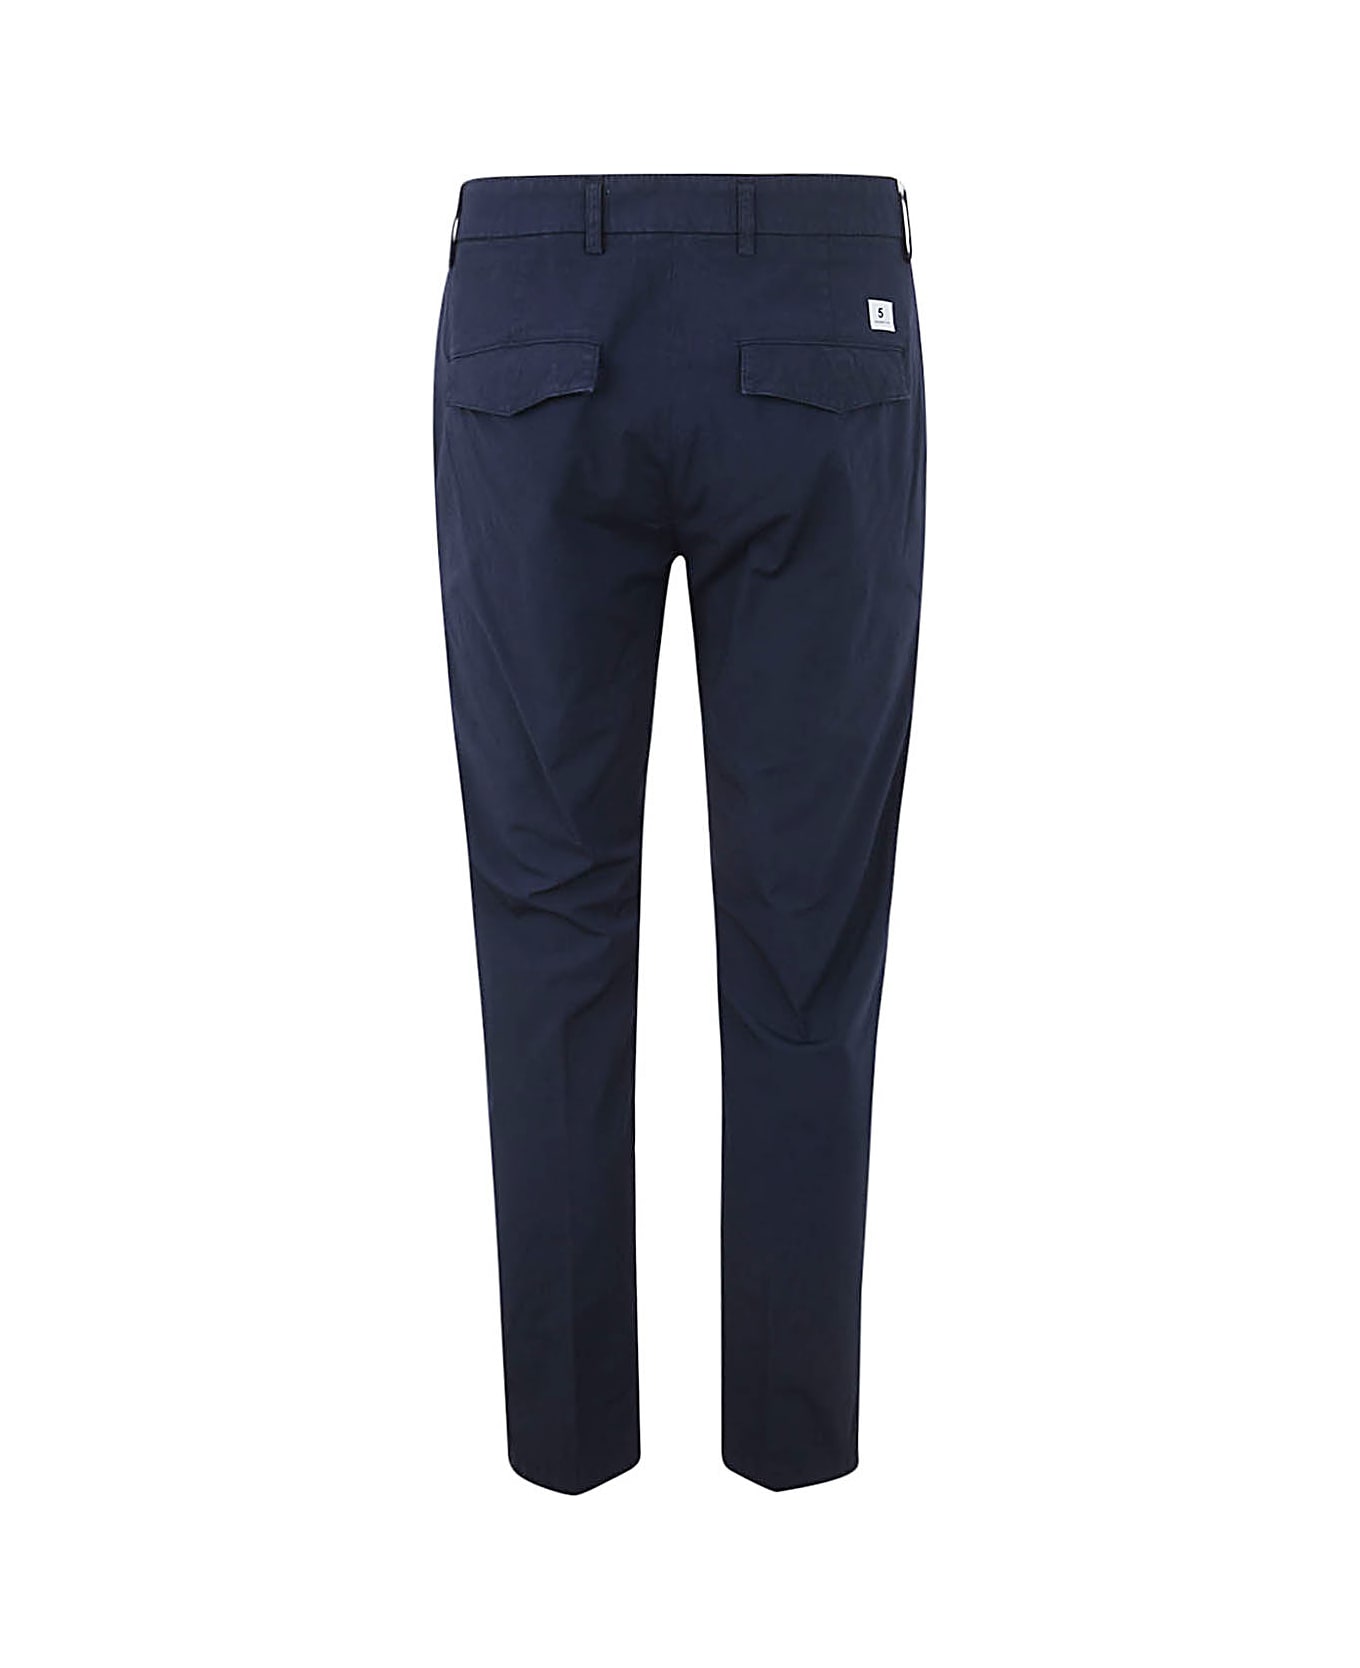 Department Five Prince Crop Chino Trousers - Navy